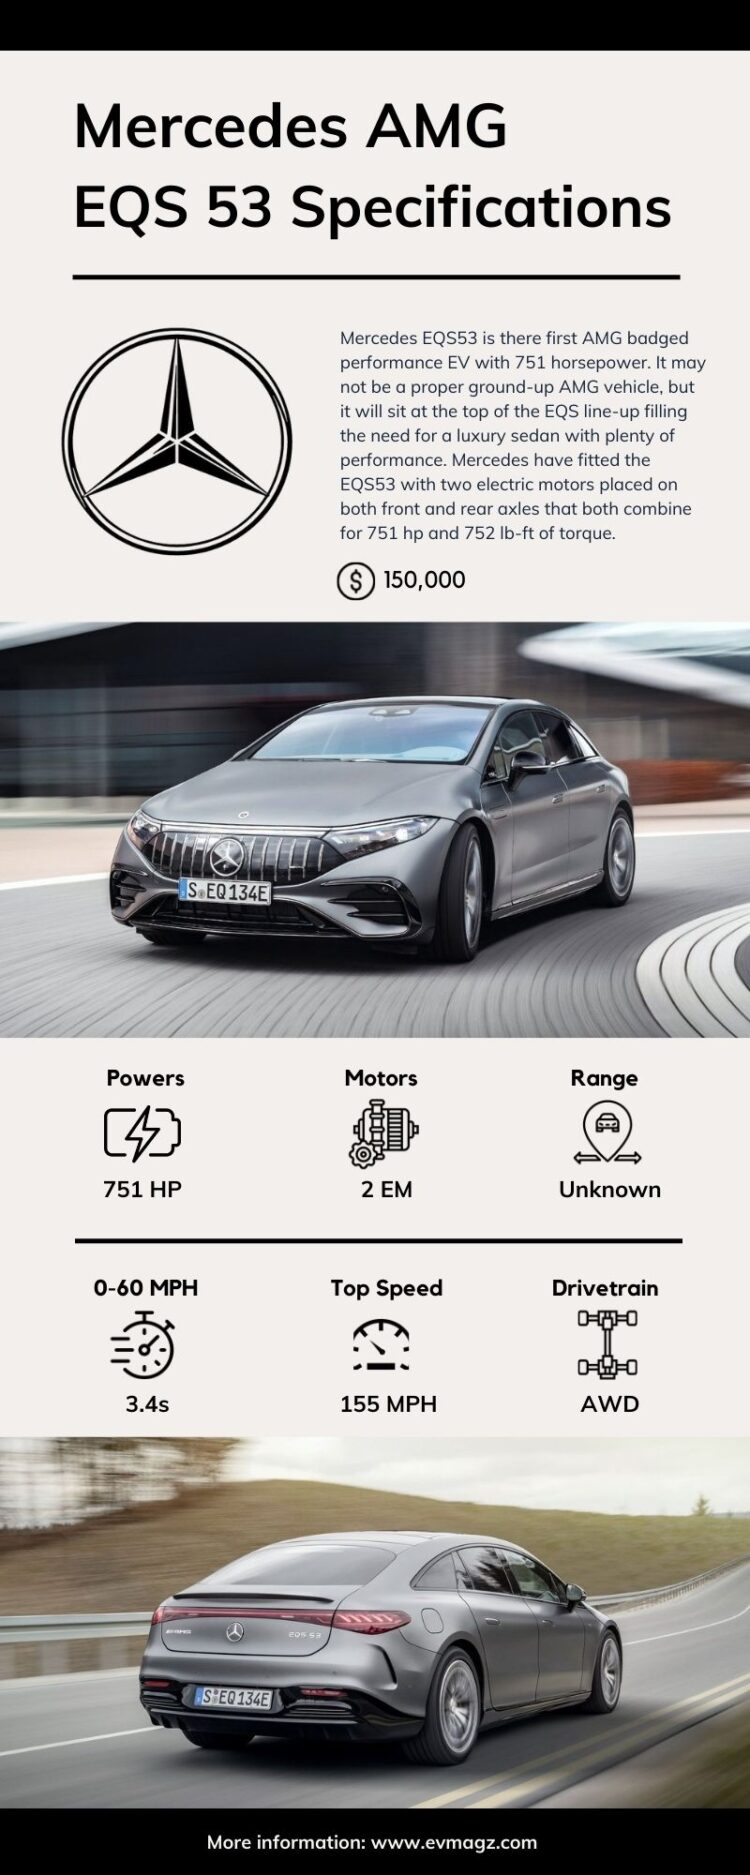 Mercedes AMG EQS 53 Price and Specifications [Infographic]